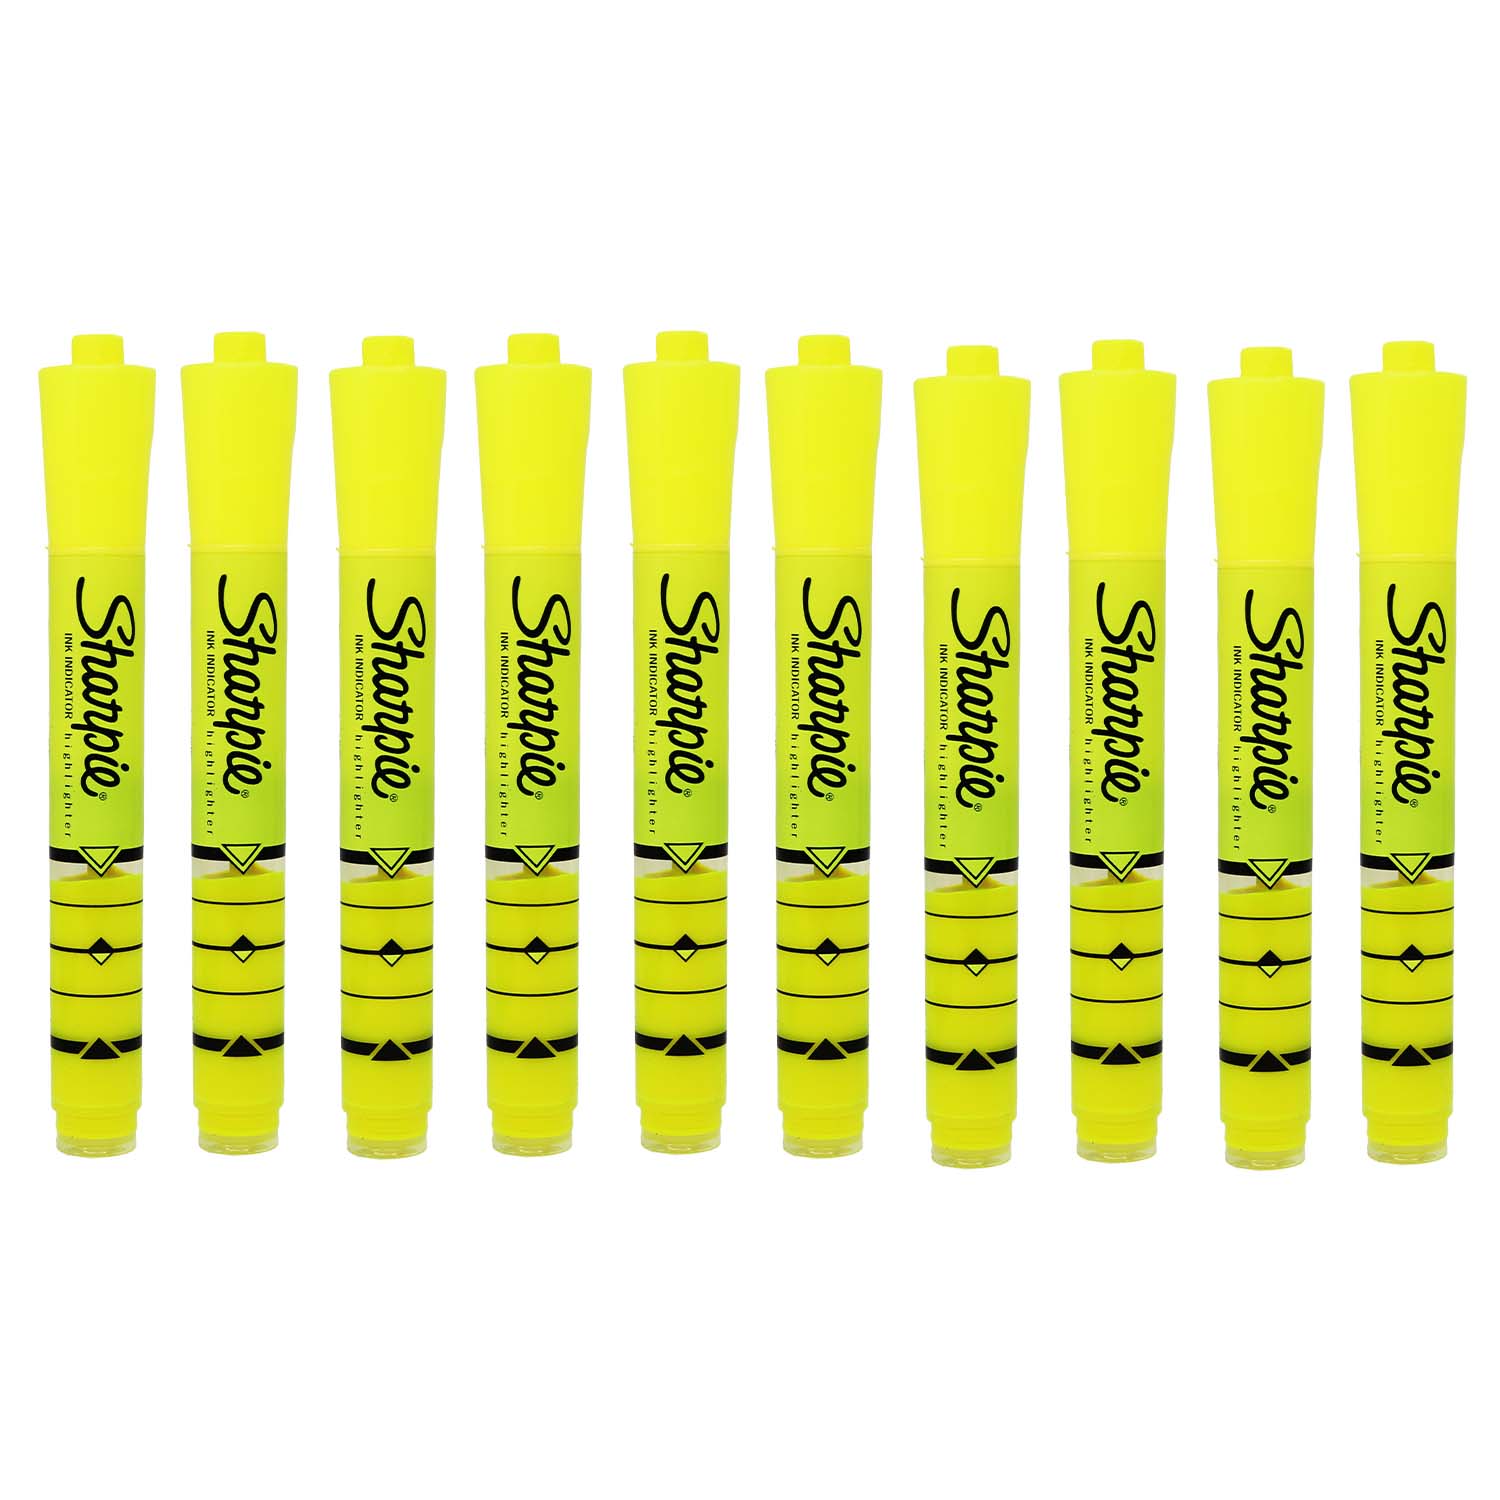 600 Ink Indicator Highlighters in Yellow - Bulk School Supplies Wholesale Case of 600 -Ink Indicator Highlighters